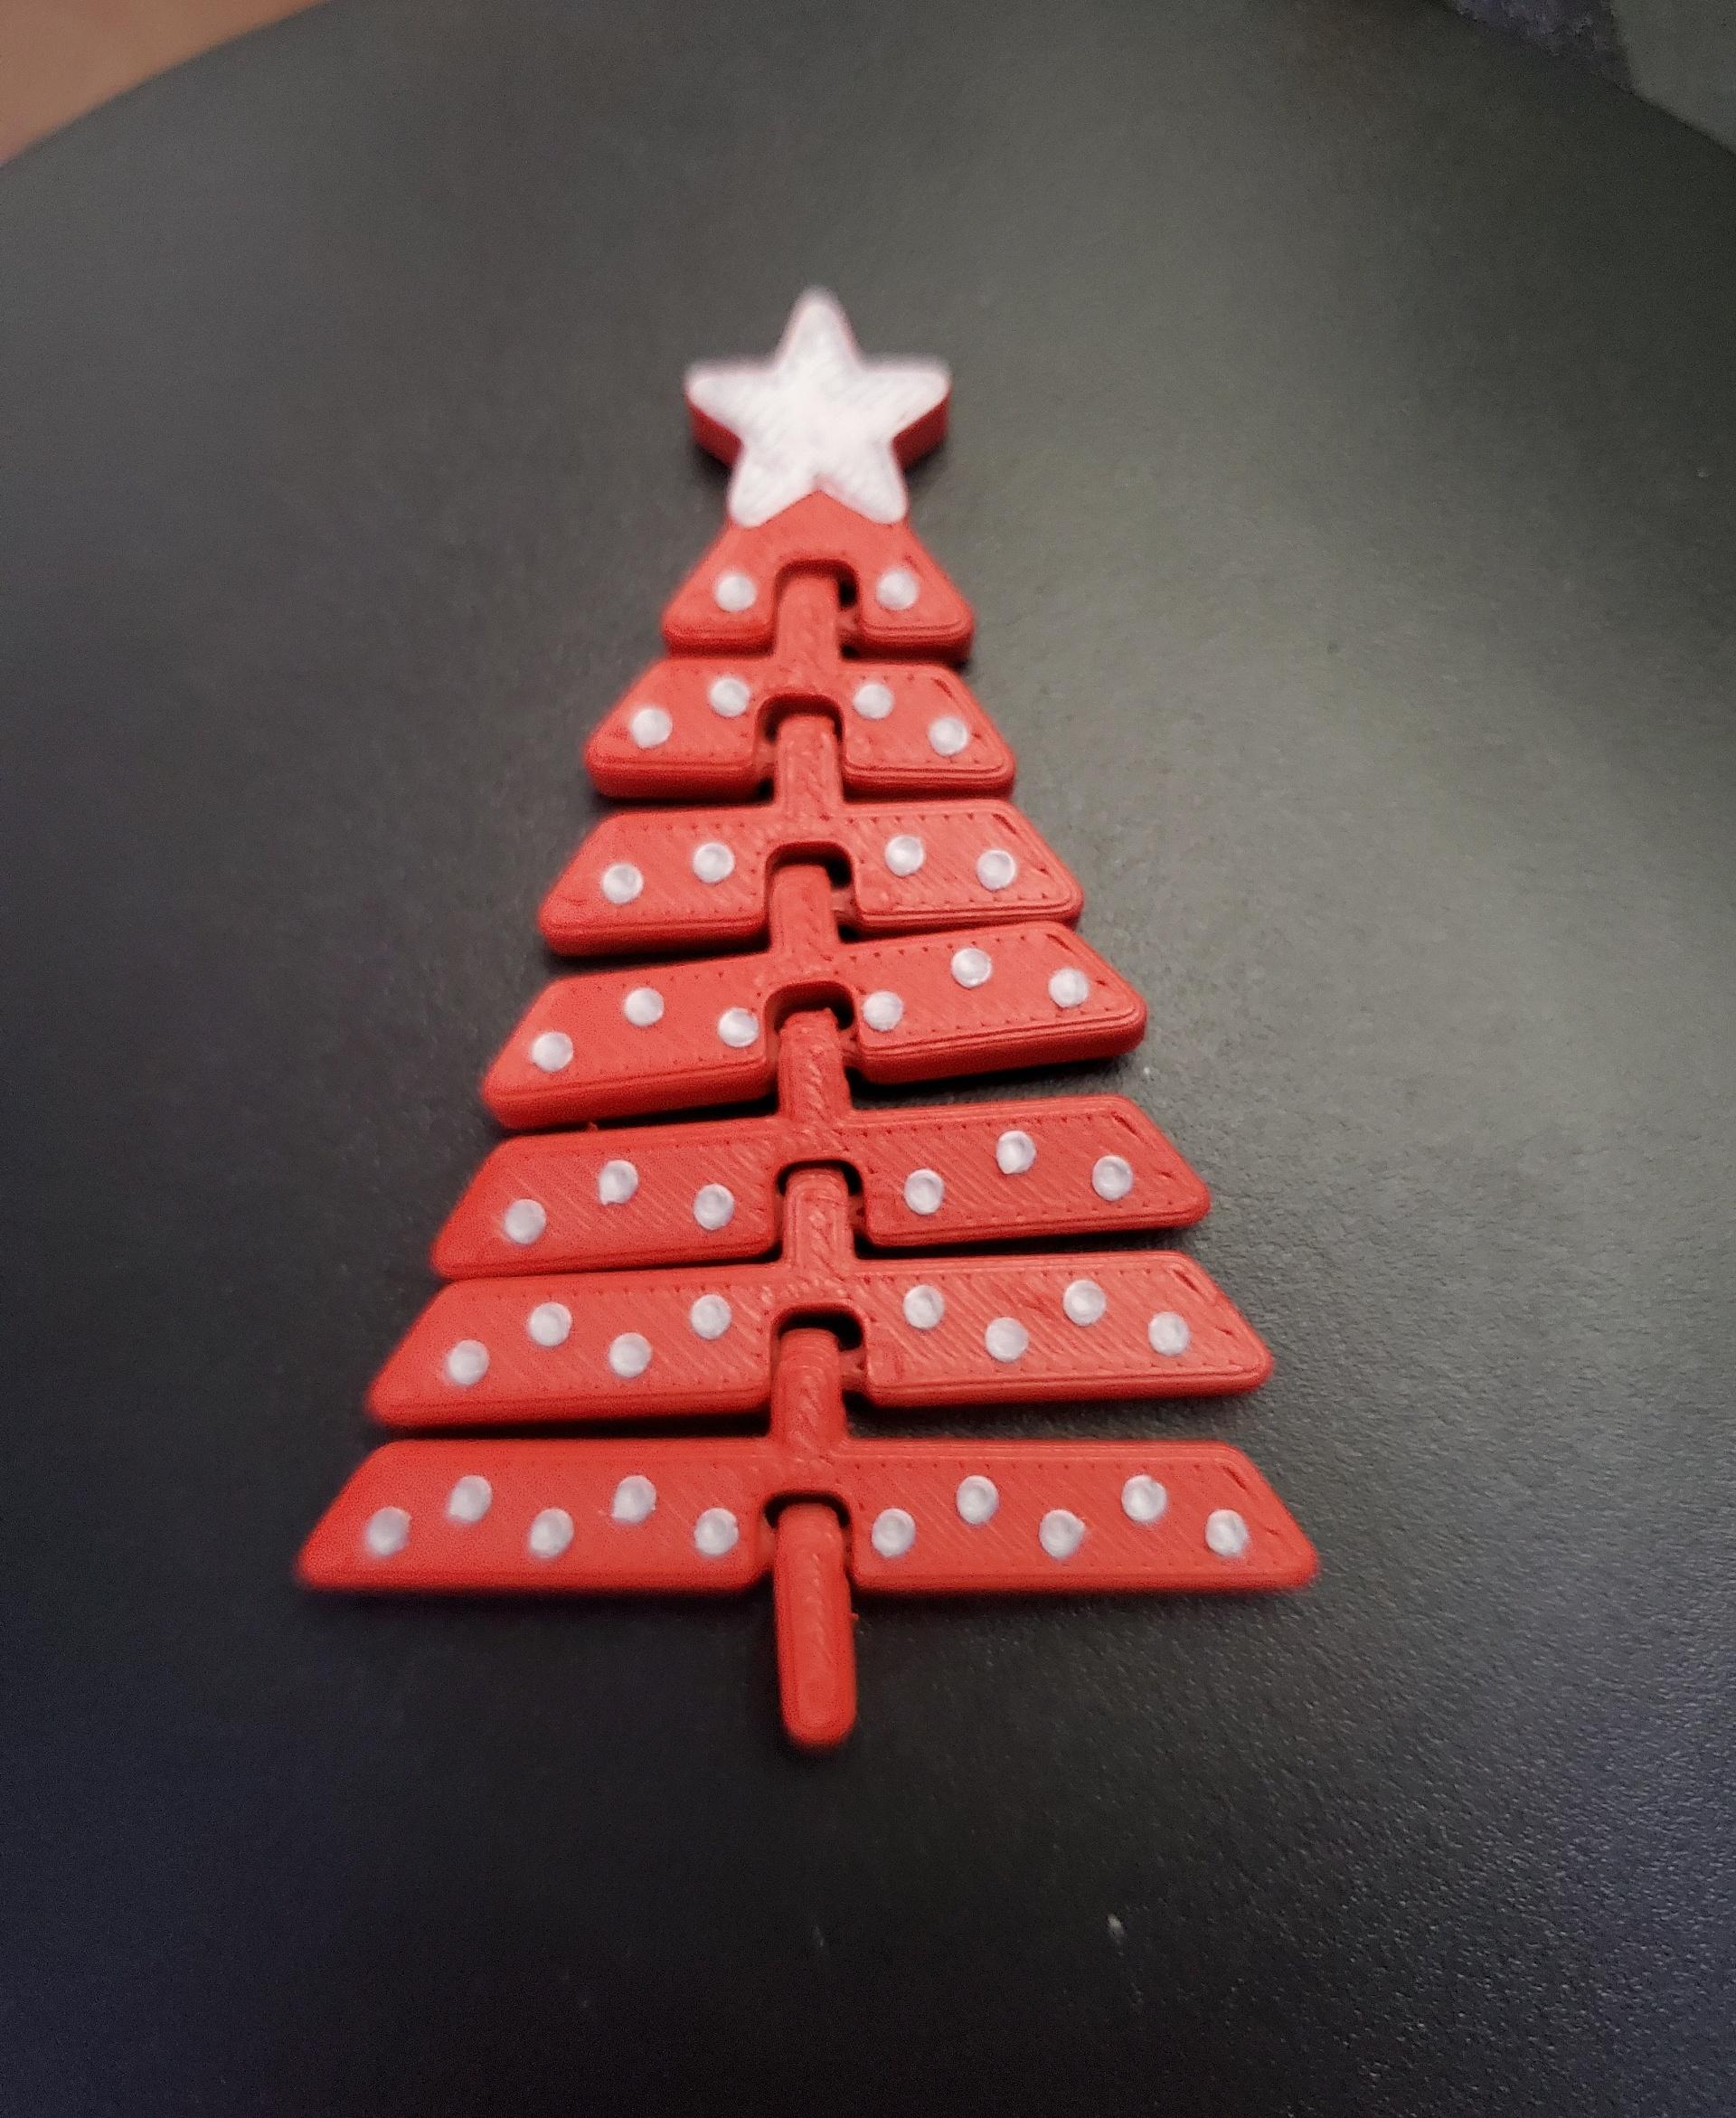 Articulated Christmas Tree with Star and Ornaments - Print in place fidget toys - 3mf - polyterra army red - 3d model